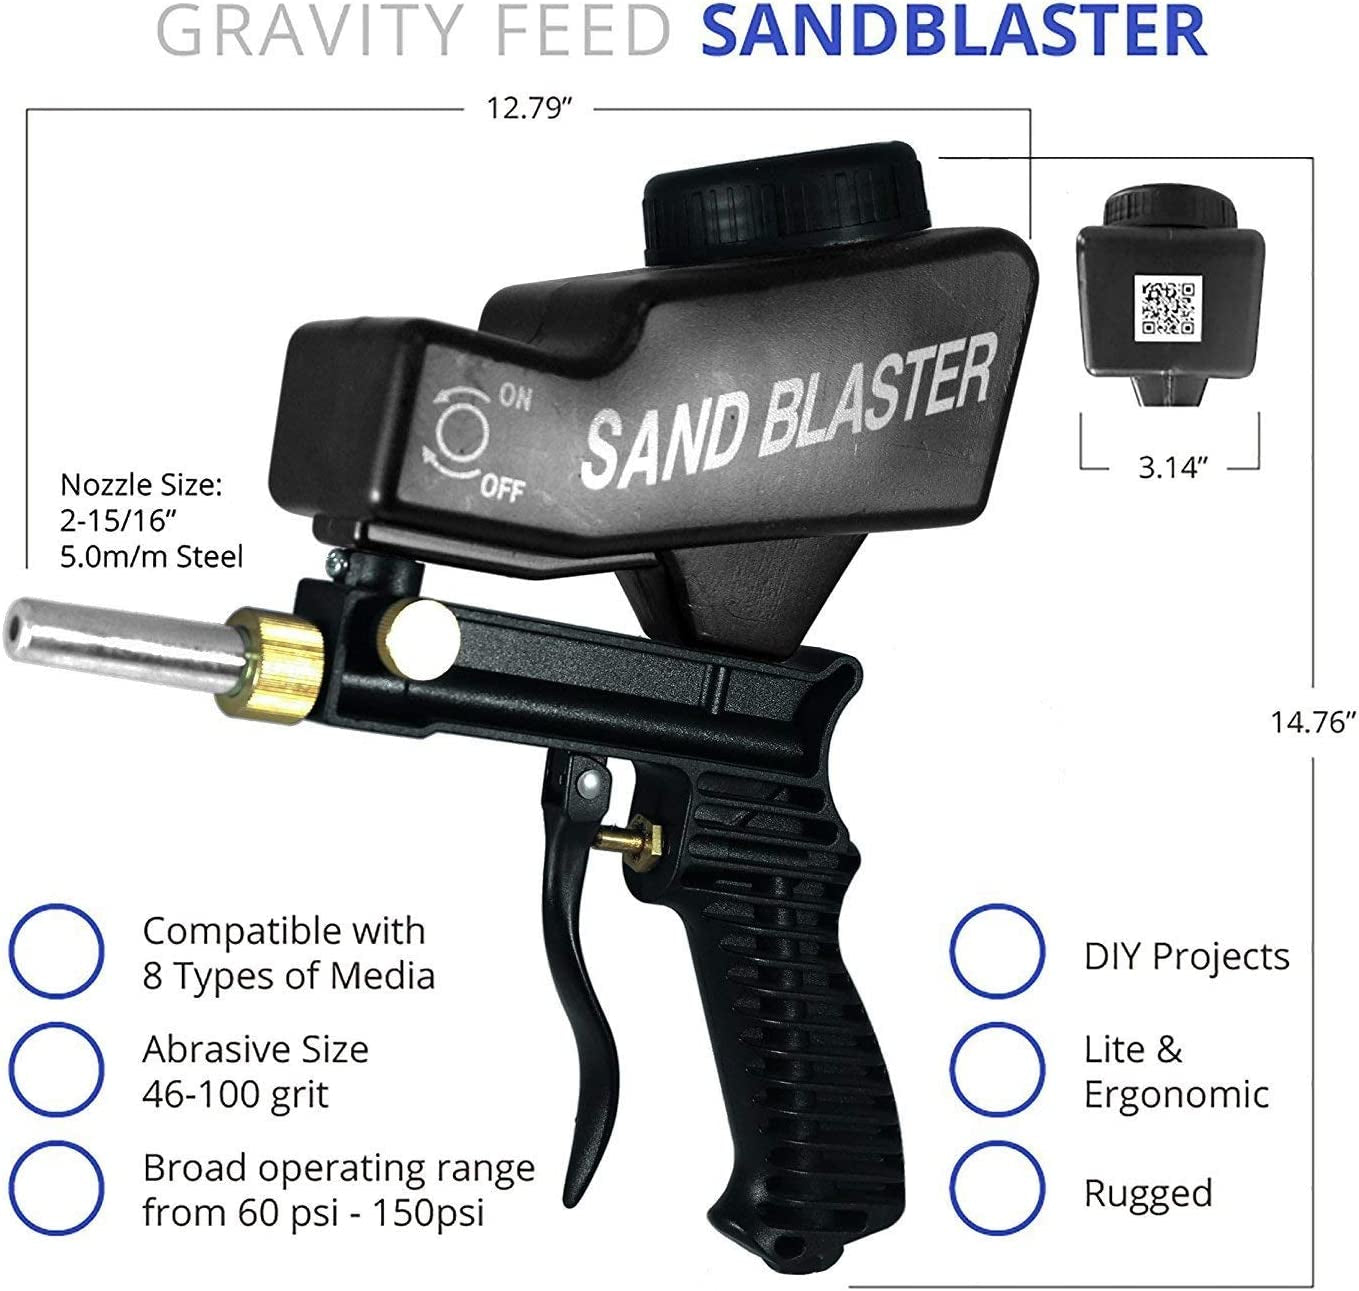 LEMATEC, Lematec Portable Gravitation Sandblasting Sand Blaster Gun Kit for All Blasting Projects, Remove Paint, Stain, Rust, Grime on Surfaces and Pool Cleaning (Black)